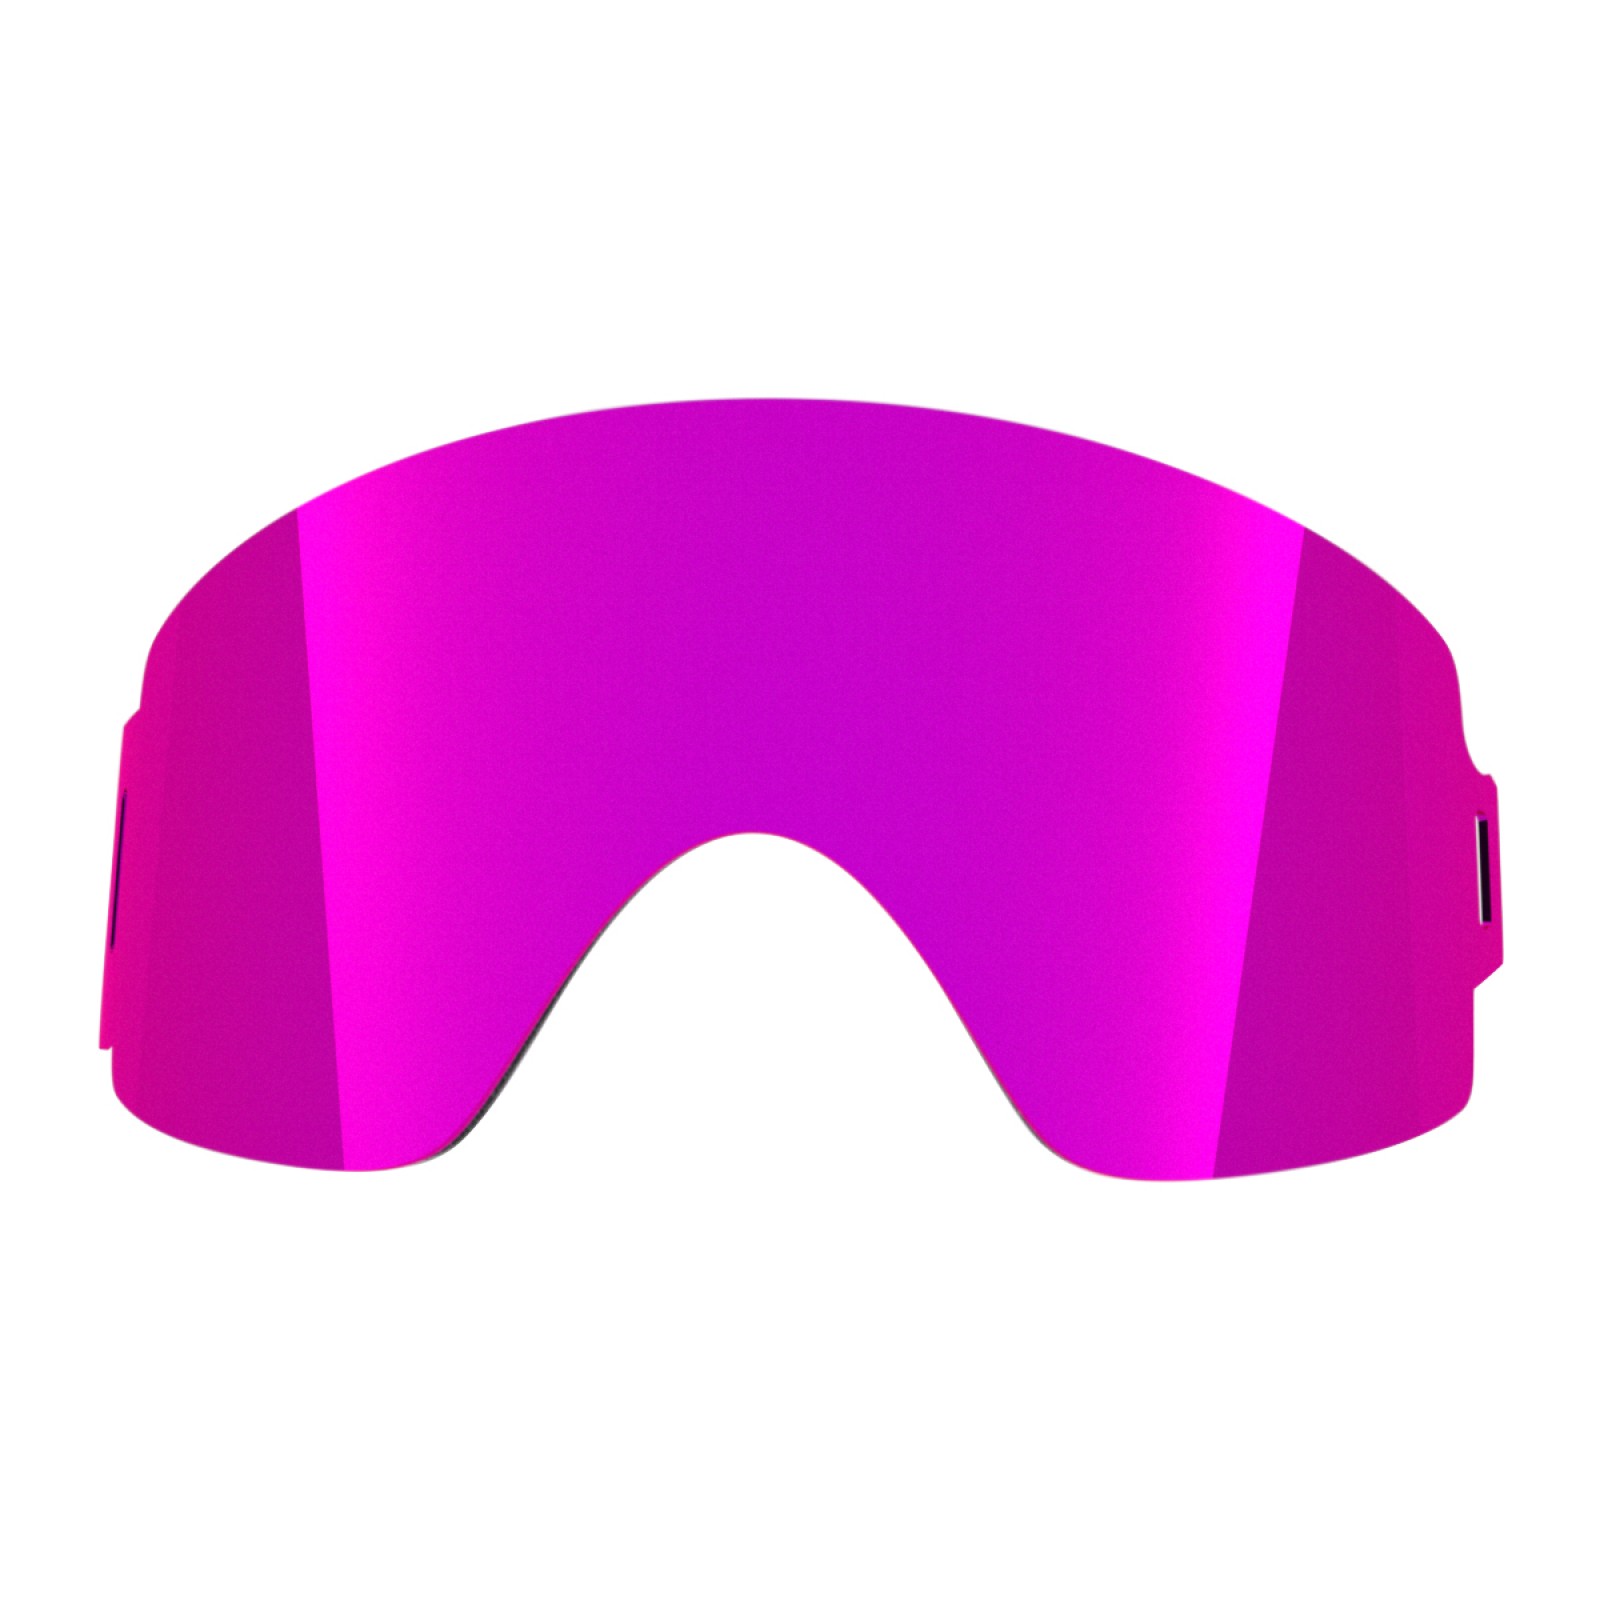 The One Loto lens for Shift goggle